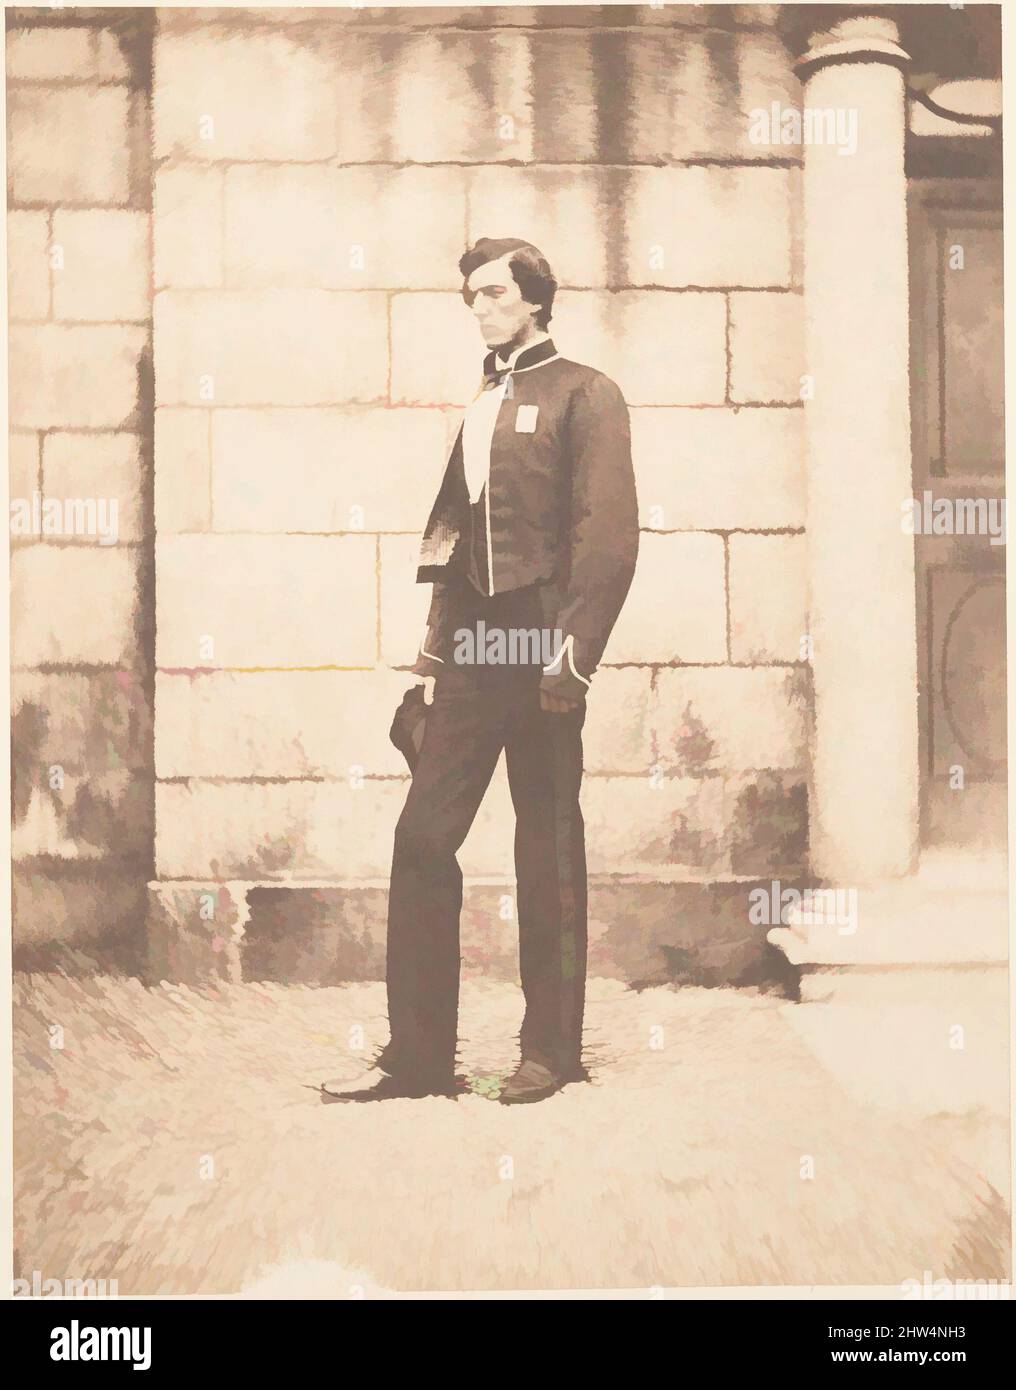 Art inspired by Portrait of a Man in Military Regalia, ca. 1859, Salted paper print, 19.5 x 15.2 cm (7 11/16 x 6 in.), Photographs, Horatio Ross (British, Rossie Castle, near Montrose, Scotland 1801–1886 Scotland, Classic works modernized by Artotop with a splash of modernity. Shapes, color and value, eye-catching visual impact on art. Emotions through freedom of artworks in a contemporary way. A timeless message pursuing a wildly creative new direction. Artists turning to the digital medium and creating the Artotop NFT Stock Photo